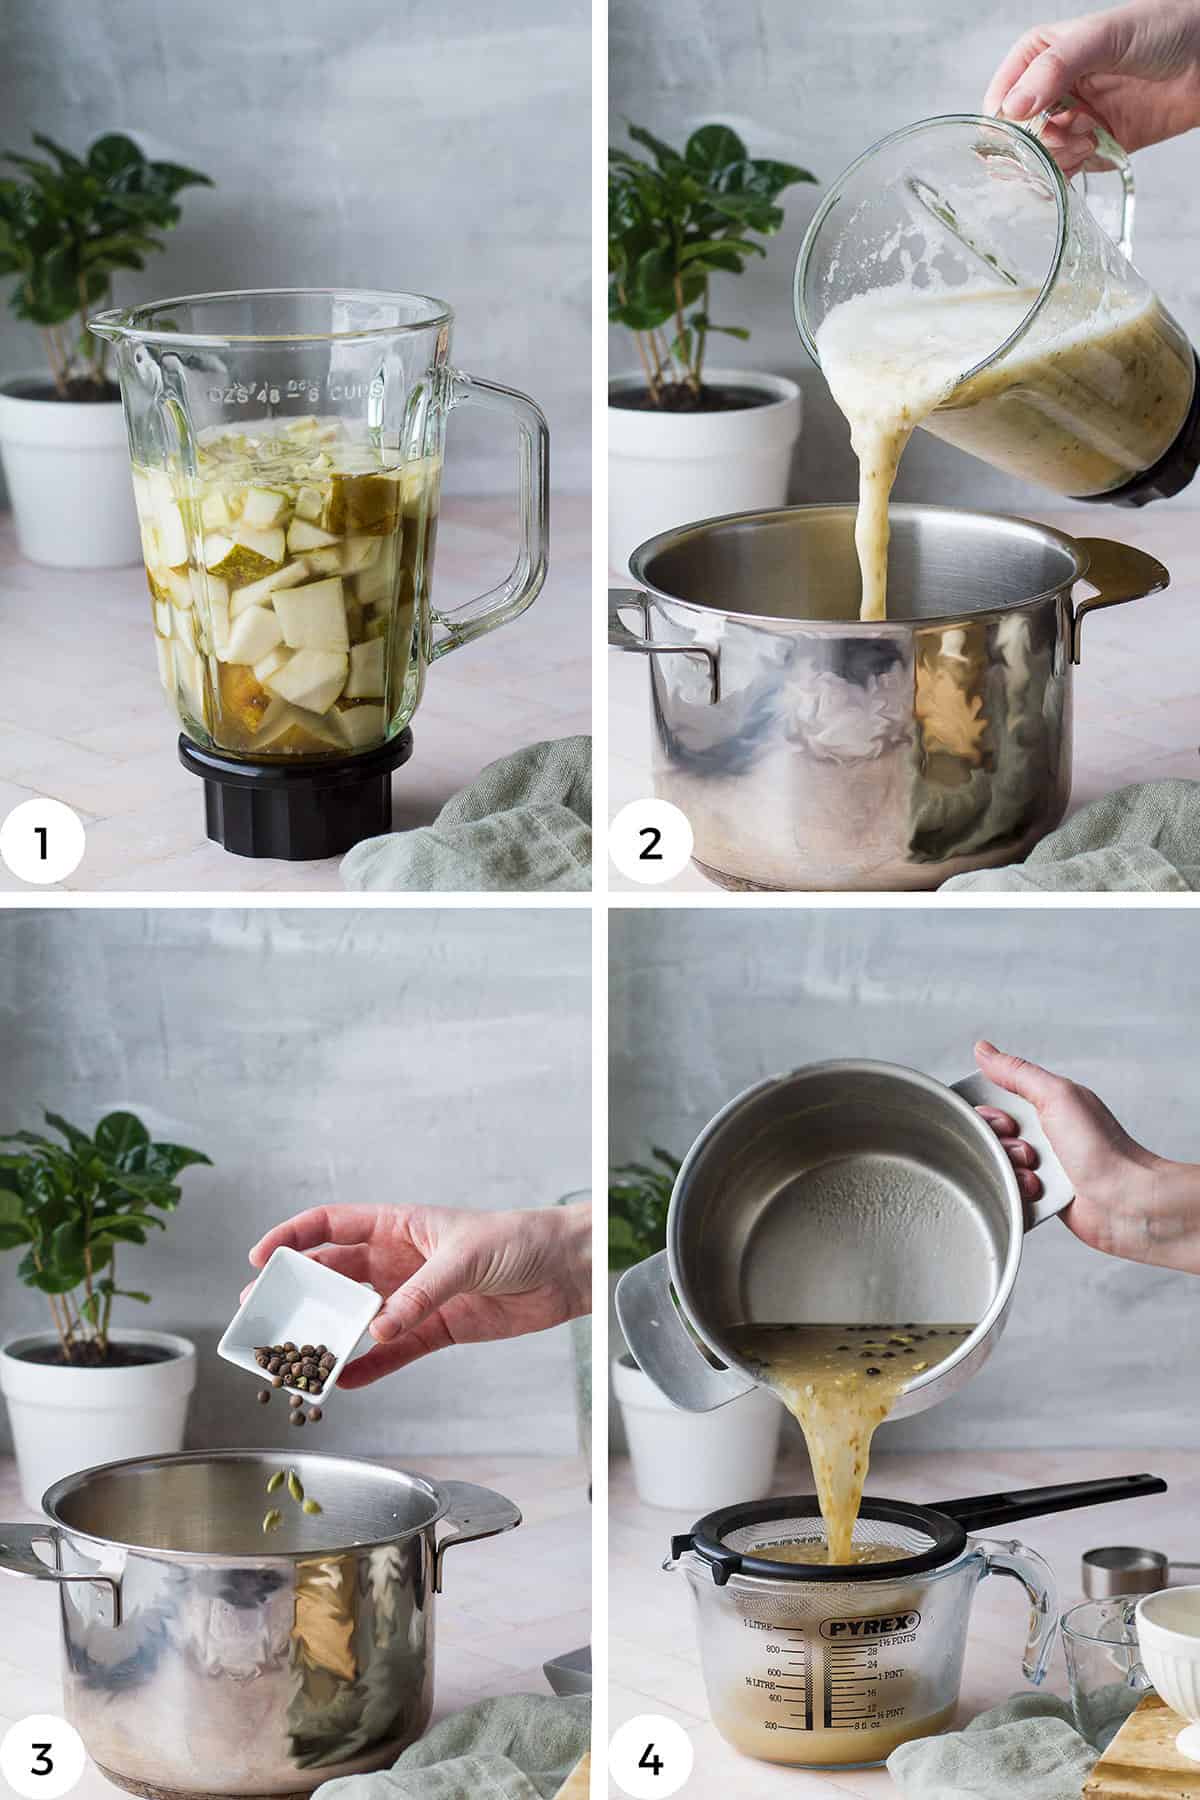 Steps to make the ginger syrup.